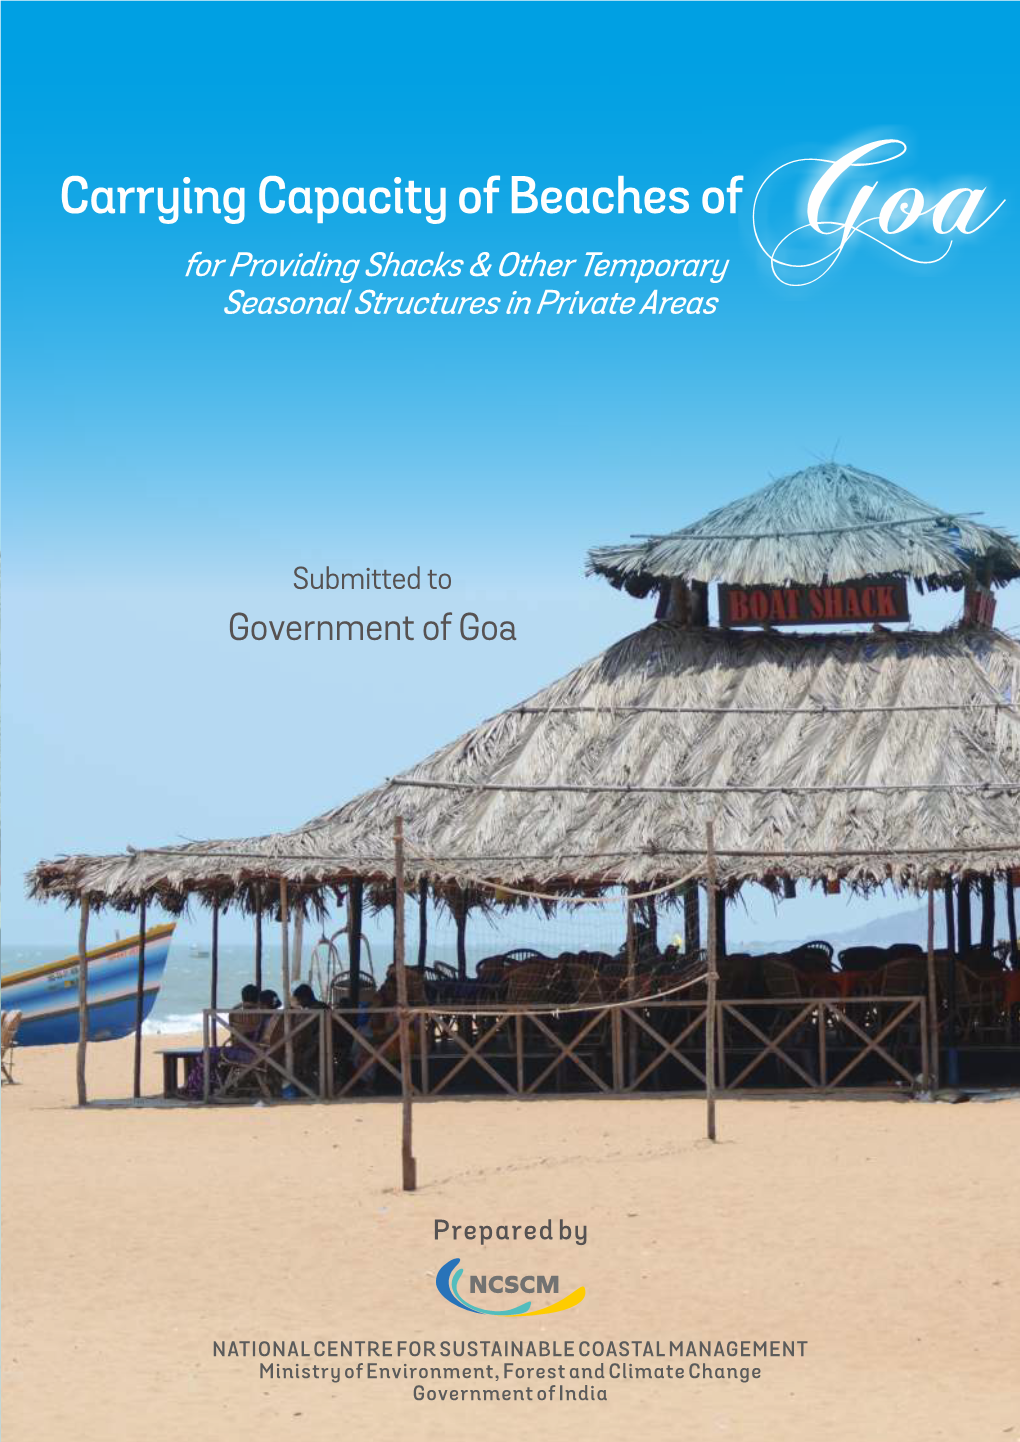 Carrying Capacity of Beaches of for Providing Shacks & Other Temporary Goa Seasonal Structures in Private Areas